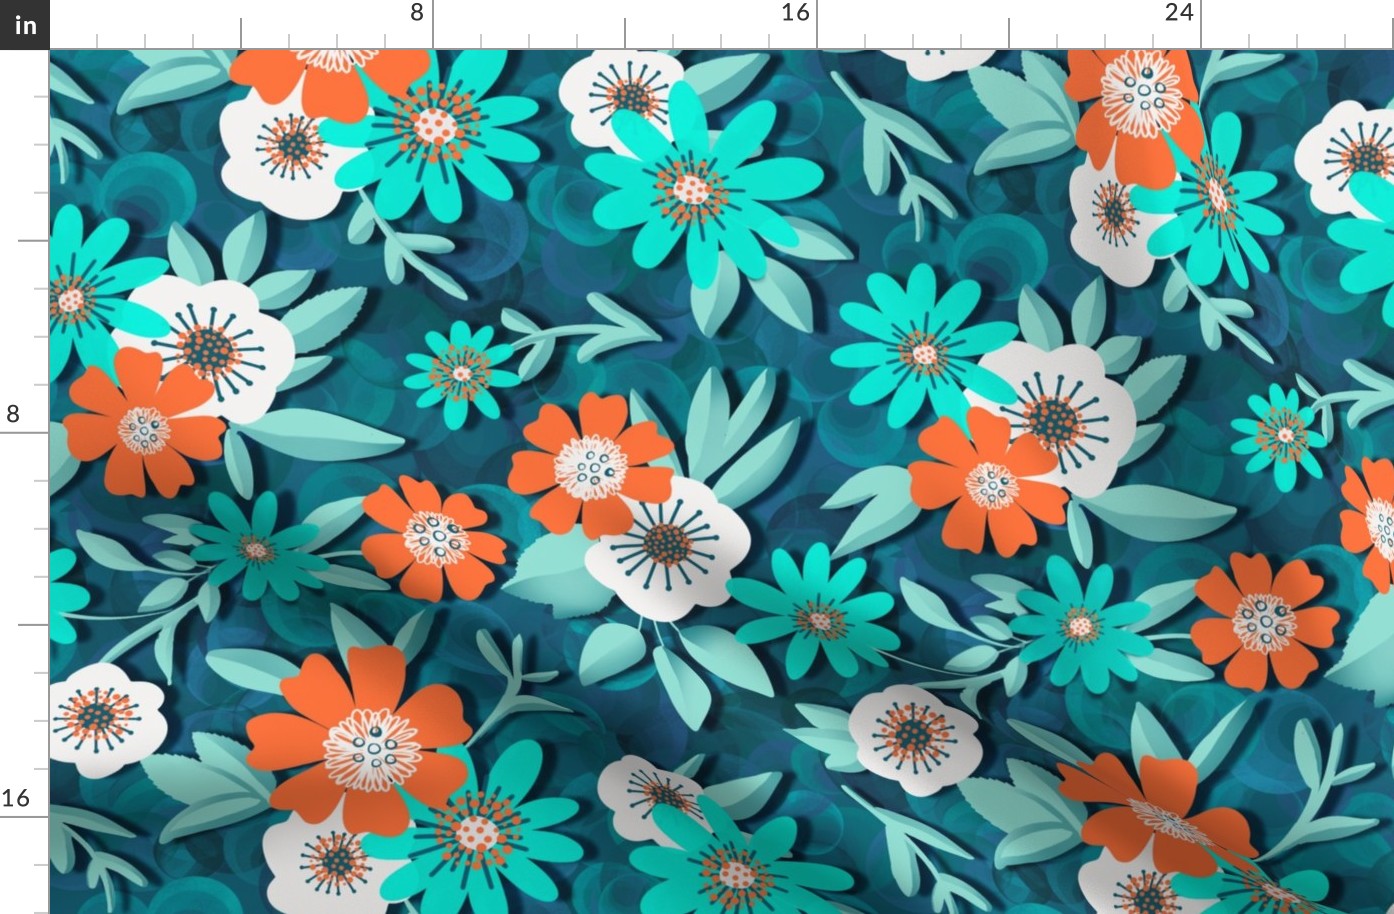 Colorful Flowers, Teal, Orange, and Aqua, white, fun, bold, playful, added dimension 16"